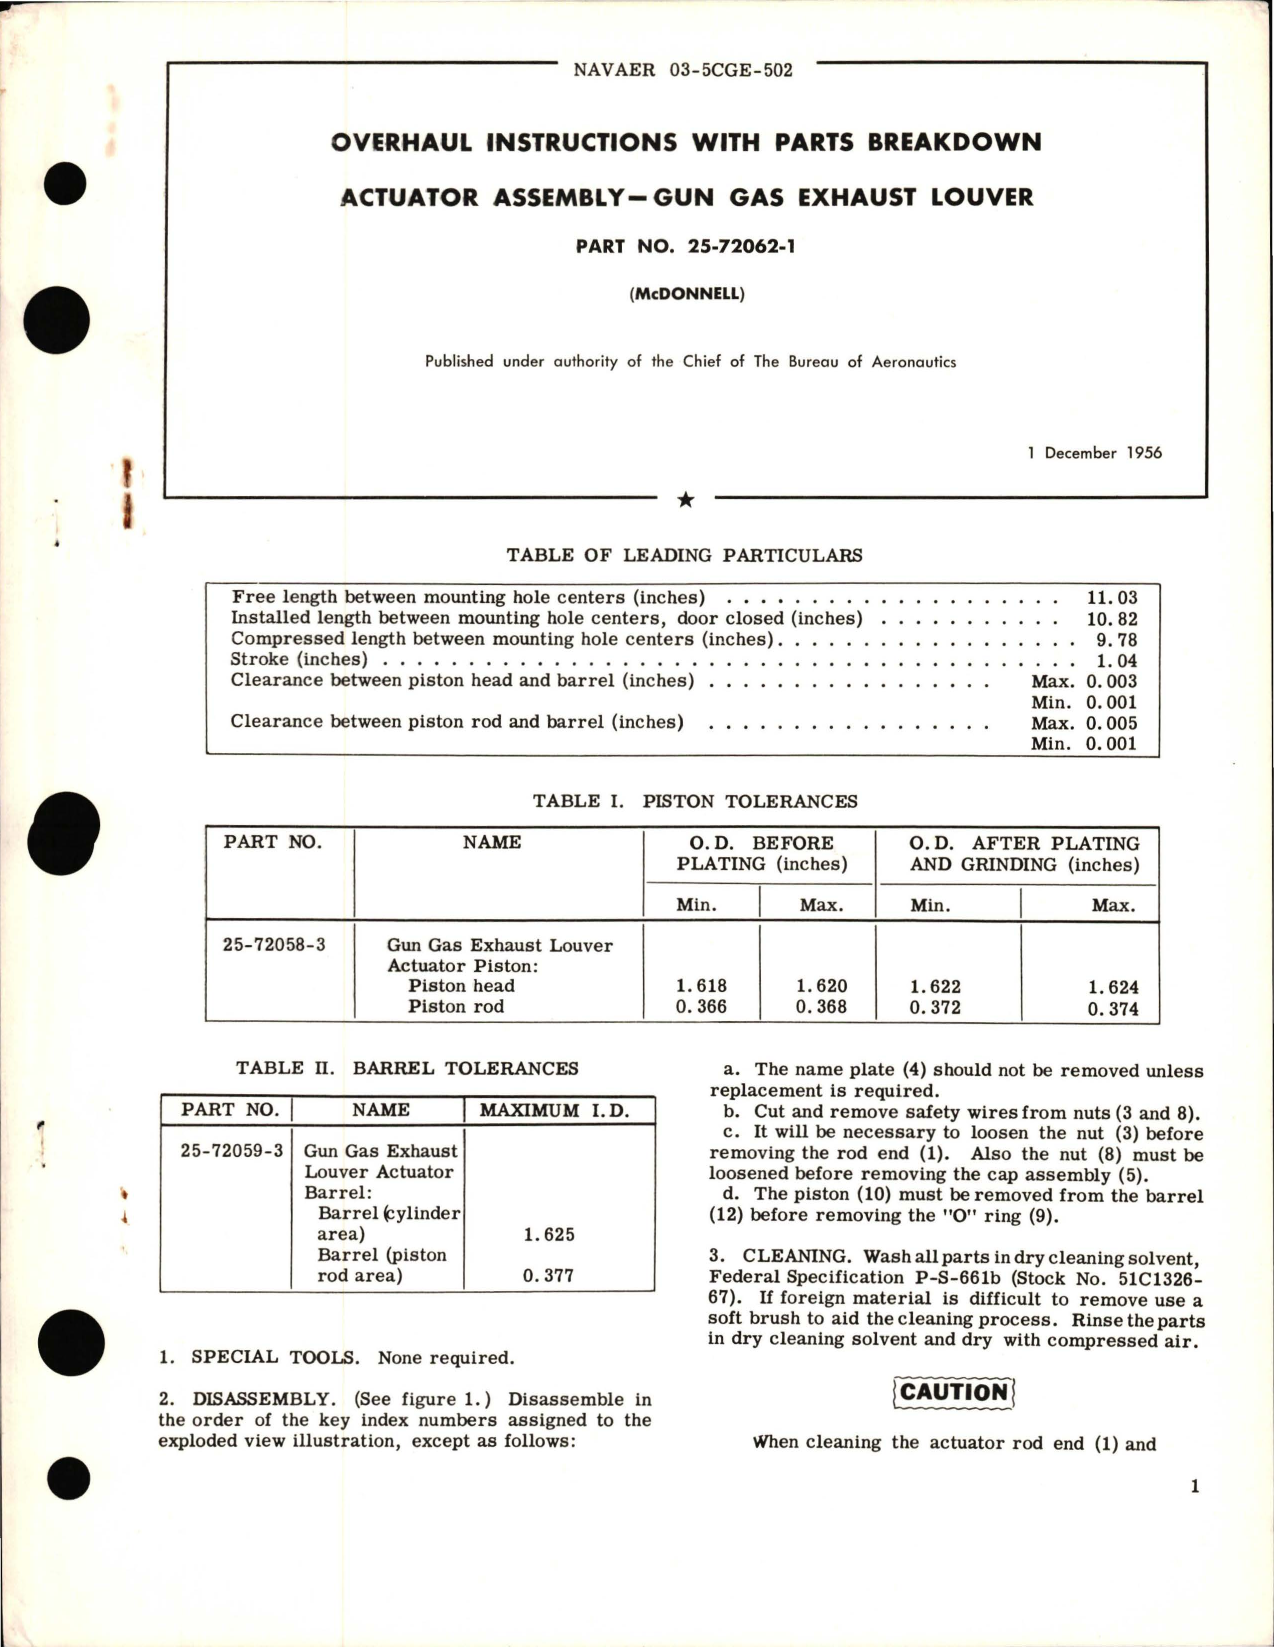 Sample page 1 from AirCorps Library document: Overhaul Instructions with Parts Breakdown for Actuator Assembly, Gun Gas Exhaust Louver - Part 25-72062-1 